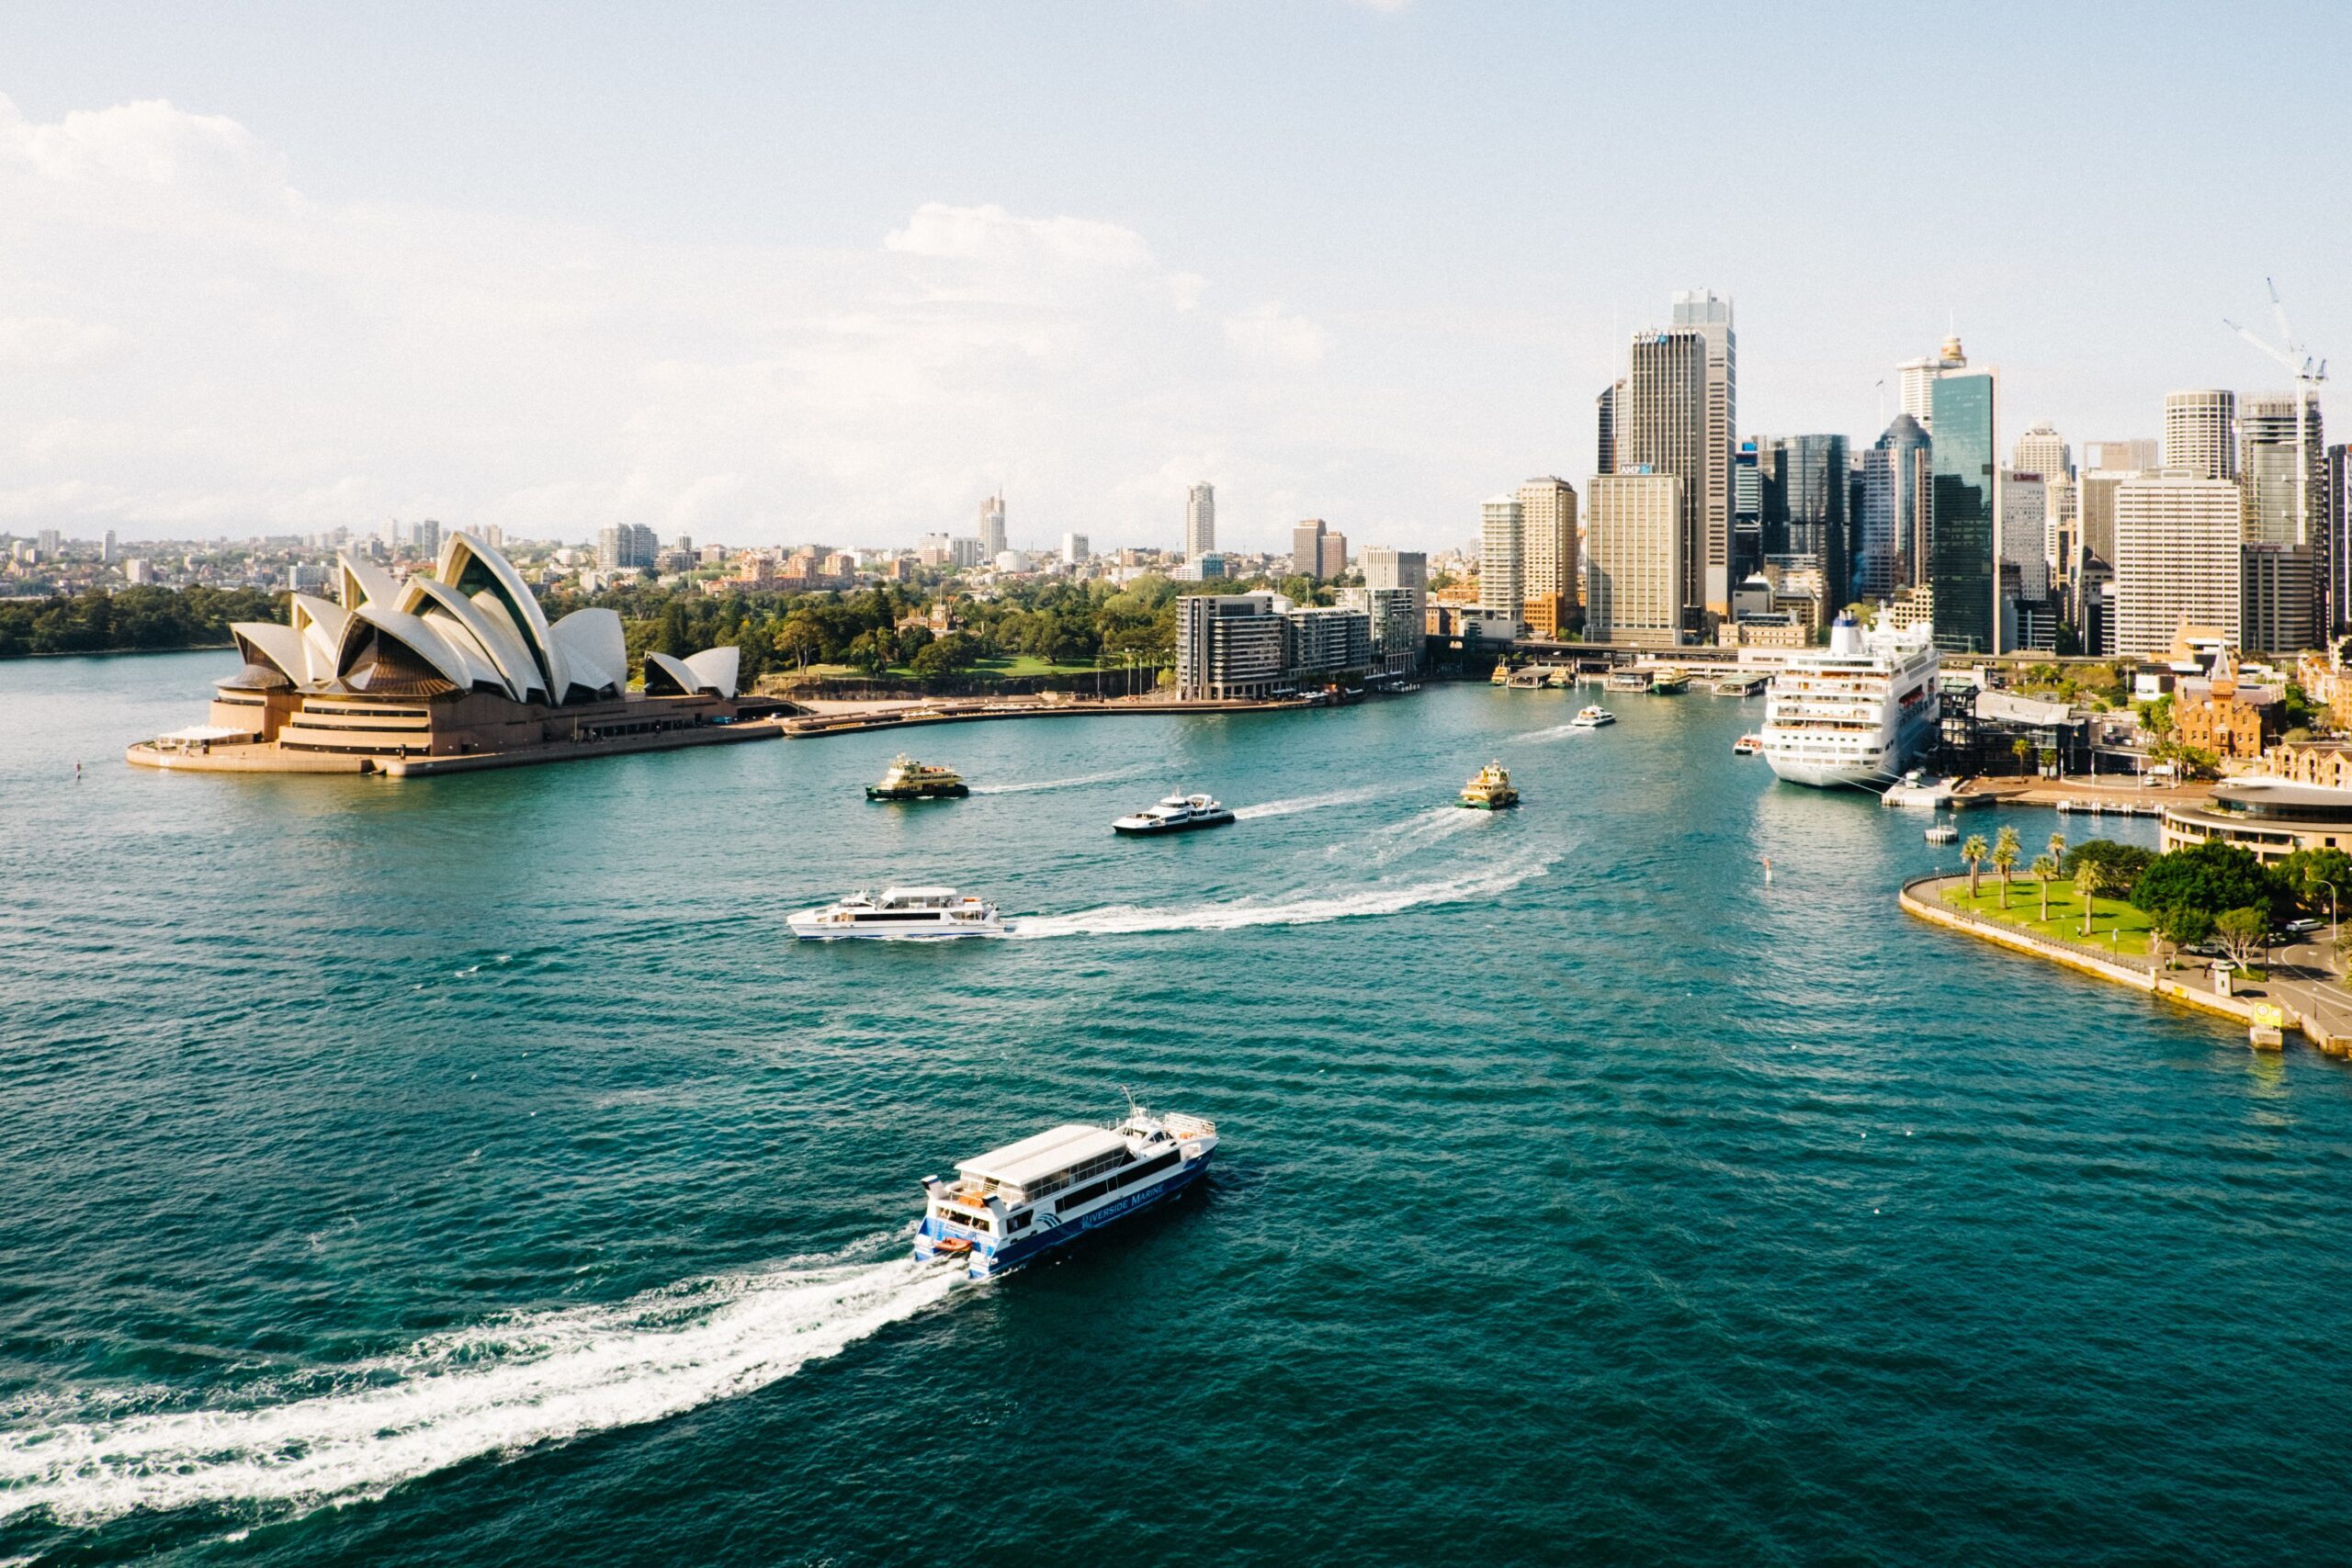 Travel with Qantas to select cities in Australia, get a Sydney stop for free